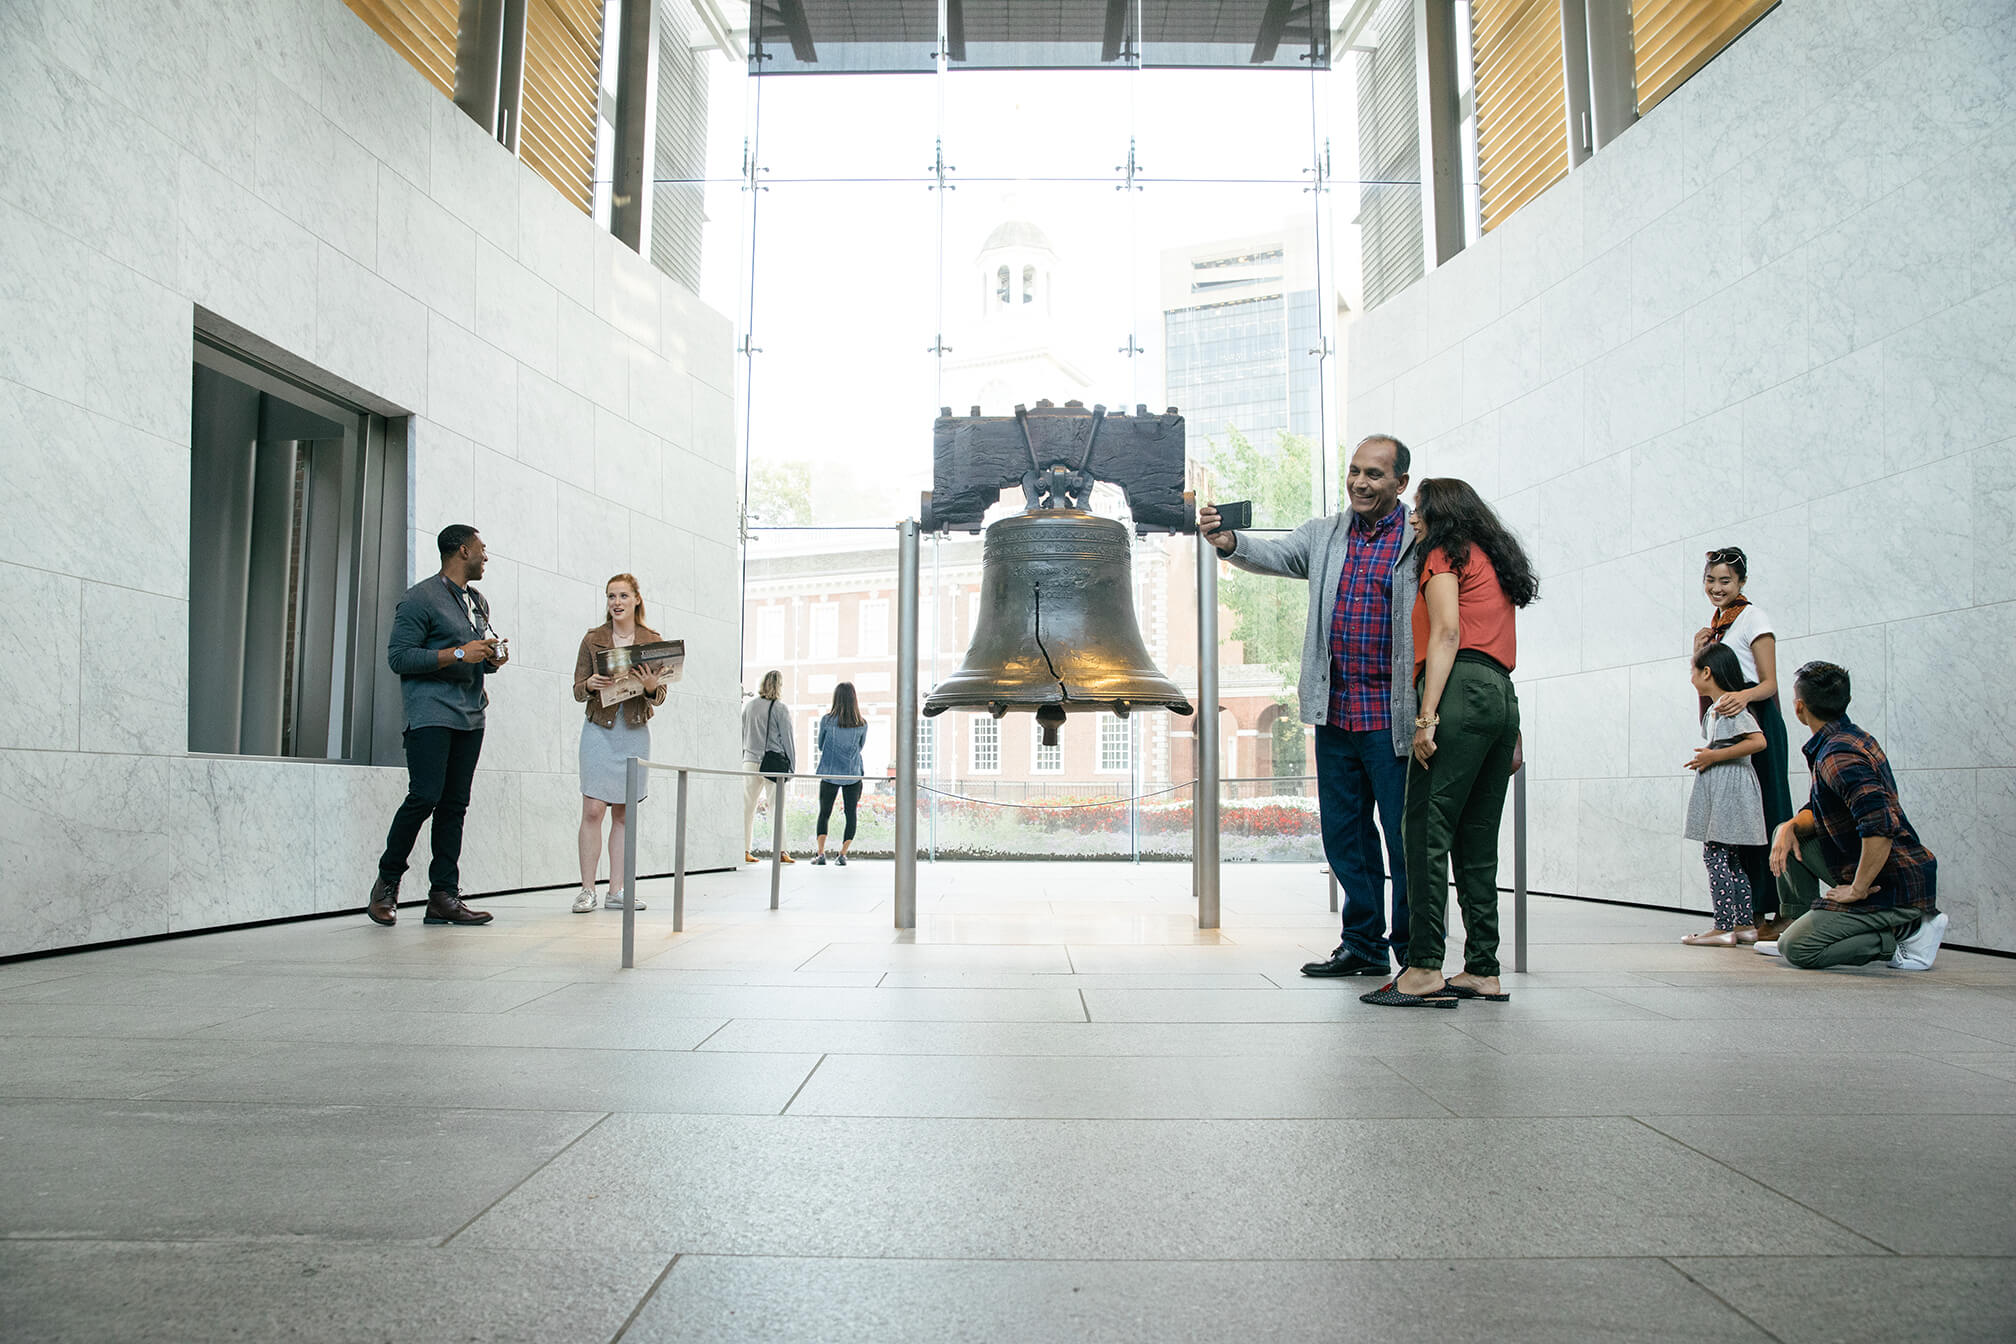 People visiting The Liberty Bell in Philadelphia.